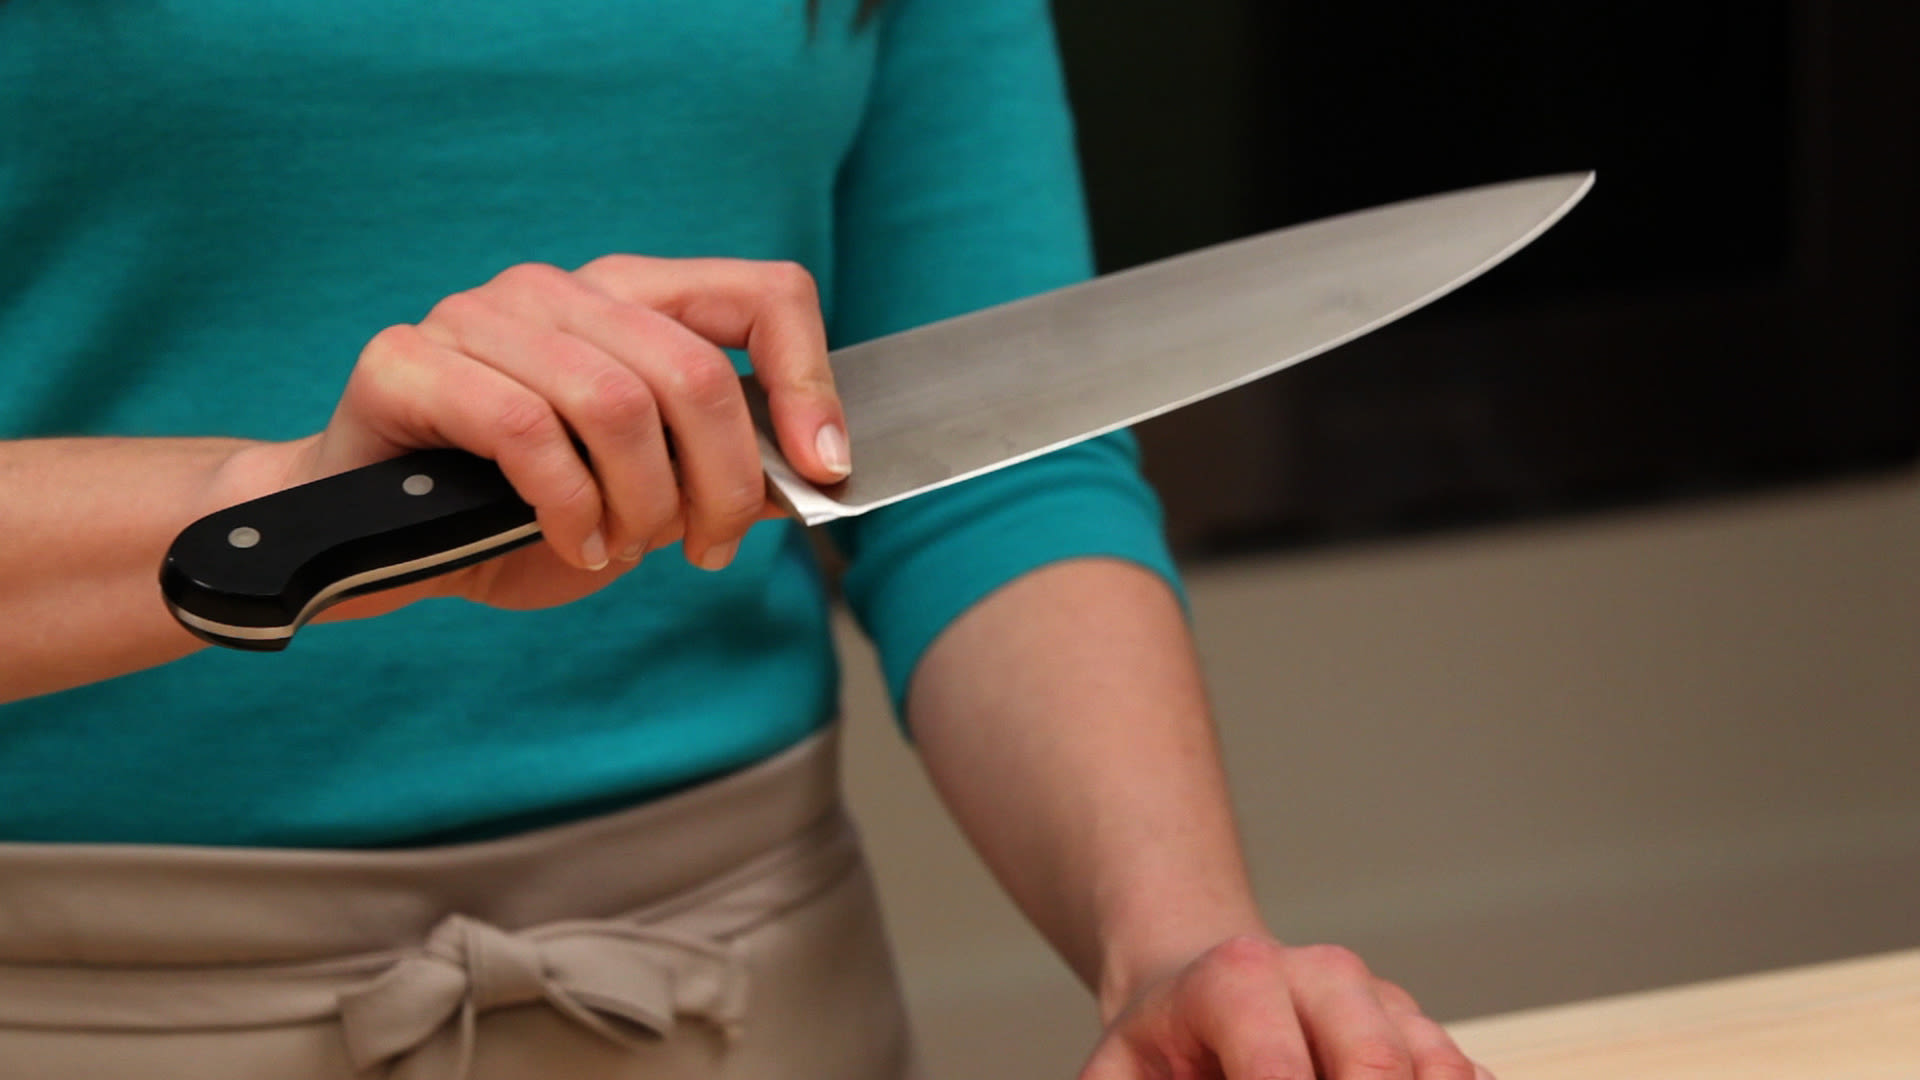 How to Use a Chef's Knife